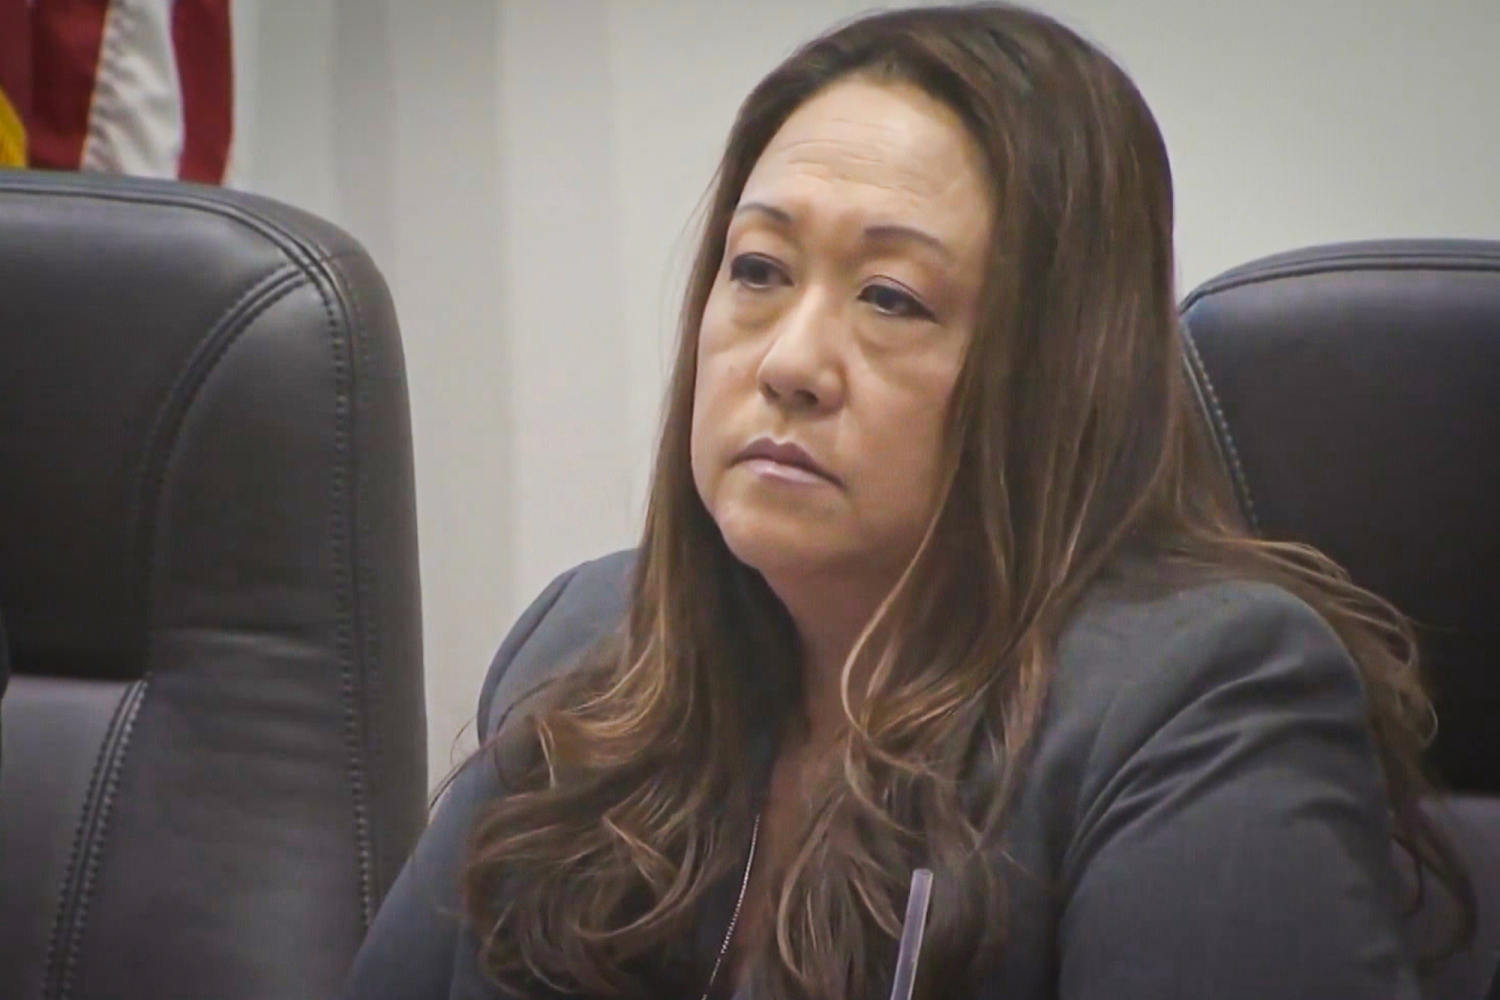 California superintendent fired for allegedly threatening students who didn't clap for her daughter